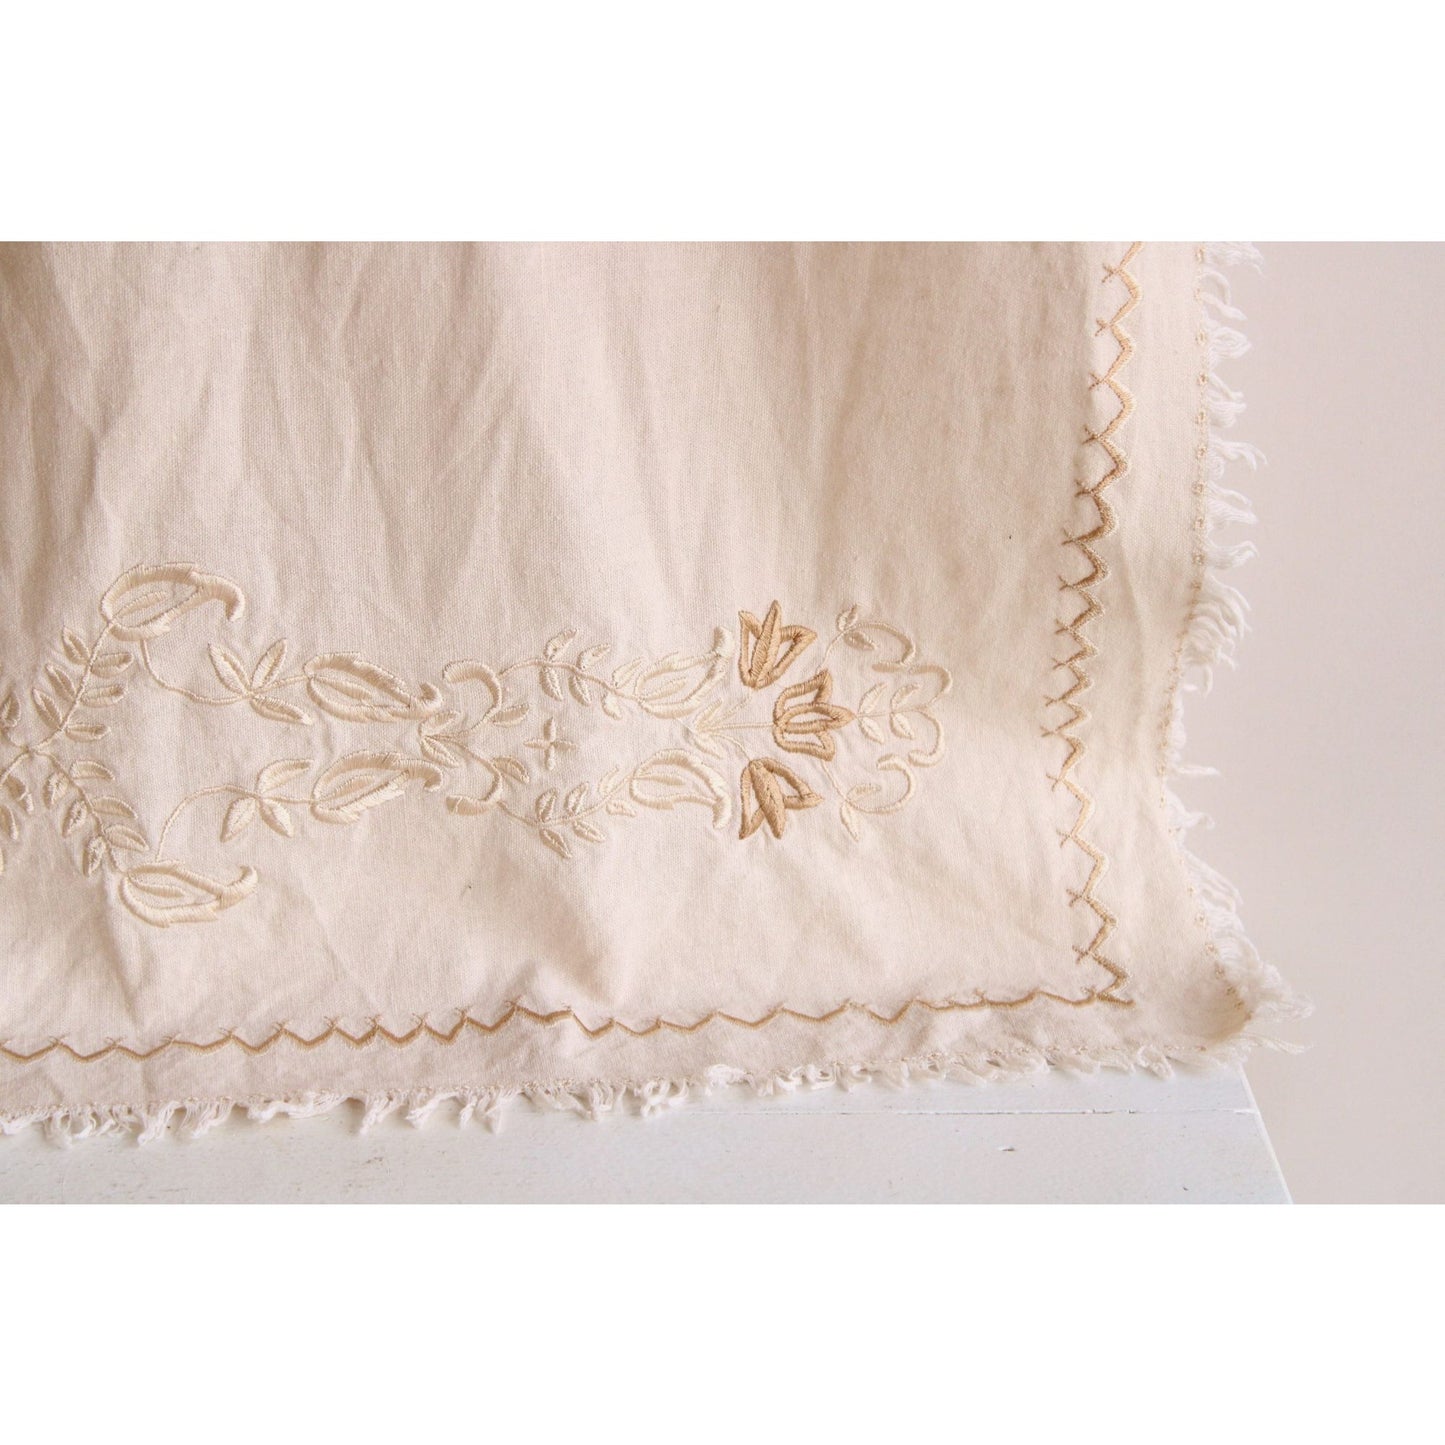 Vintage 1970s Linen Table Runner With Embroidered Tulip Flowers